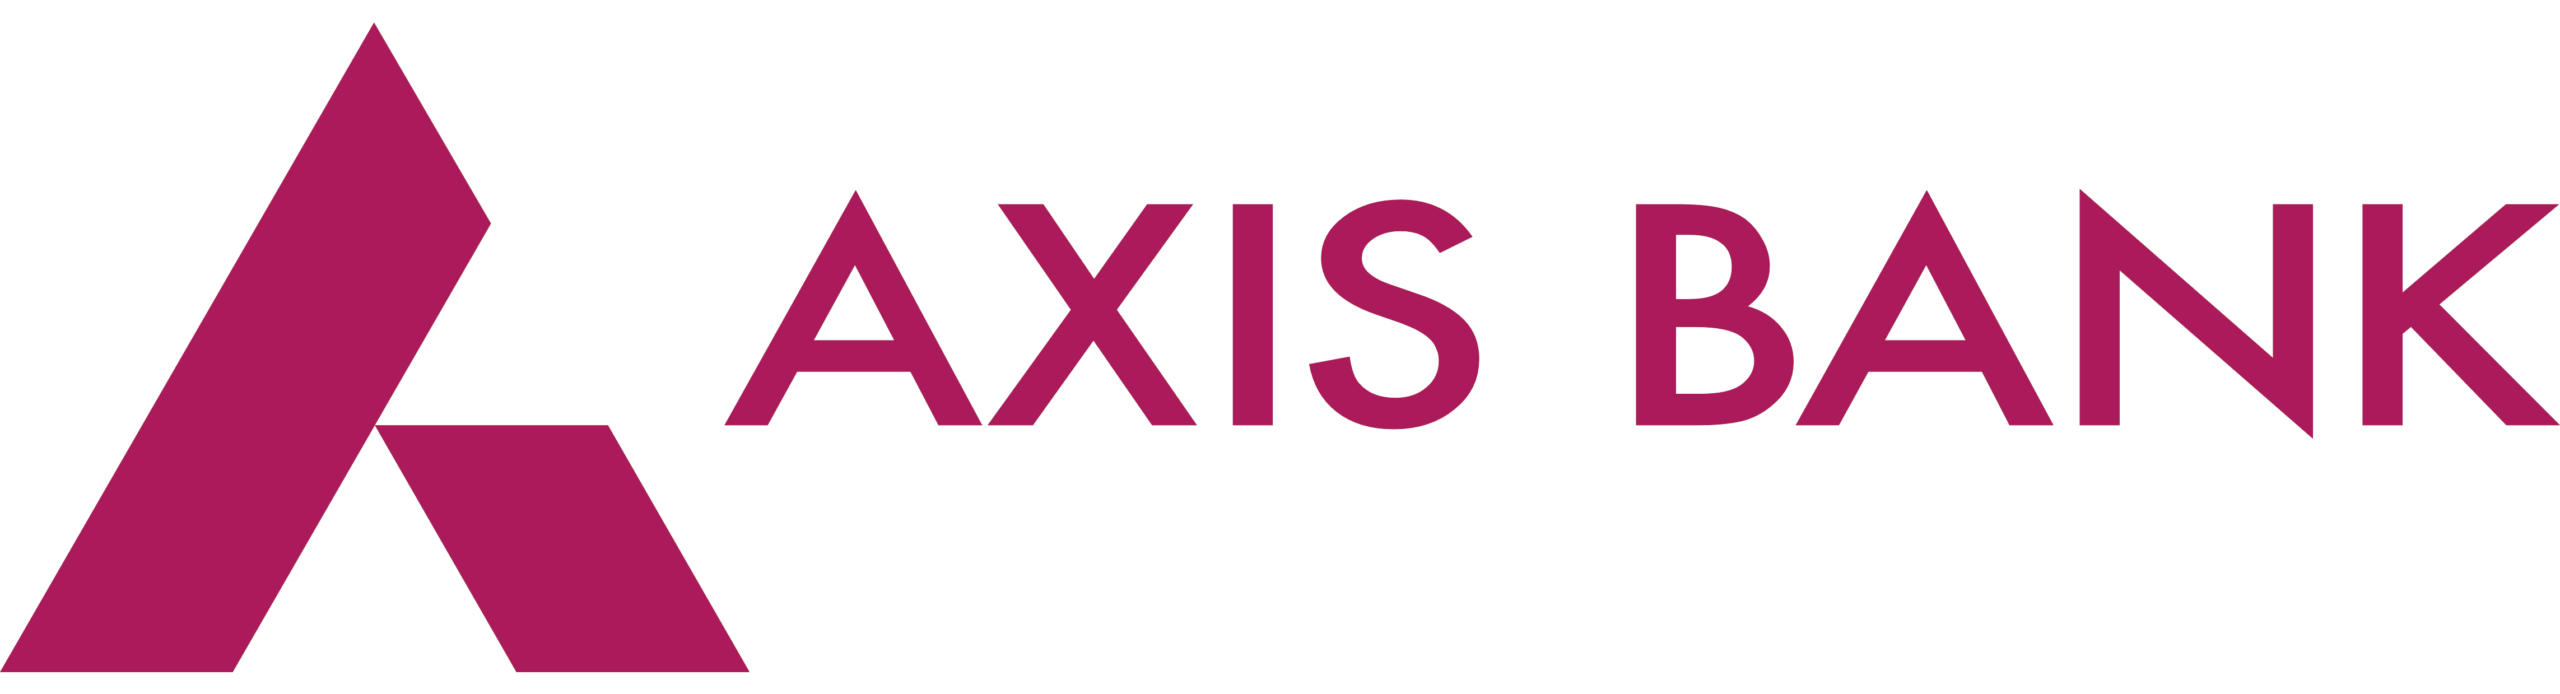 Axis Bank ltd- Top MBA colleges in Chennai- CBS is the best b schools in Chennai